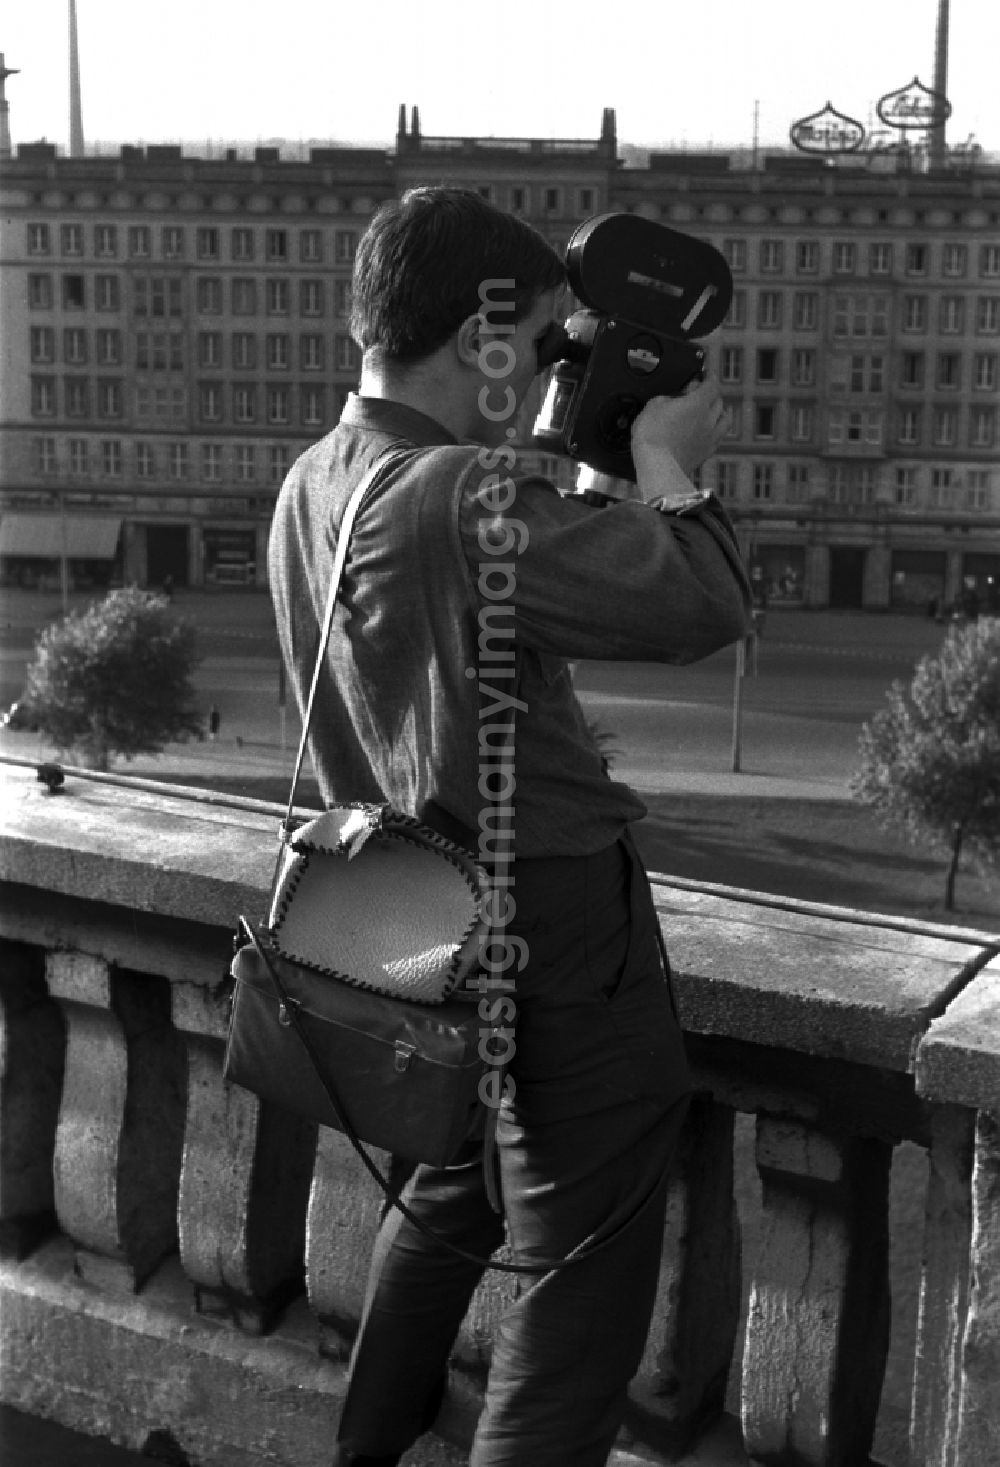 GDR image archive: Berlin - Mitte - A young man standing on a balcony and filmed with a 16 mm film camera in Berlin - Mitte